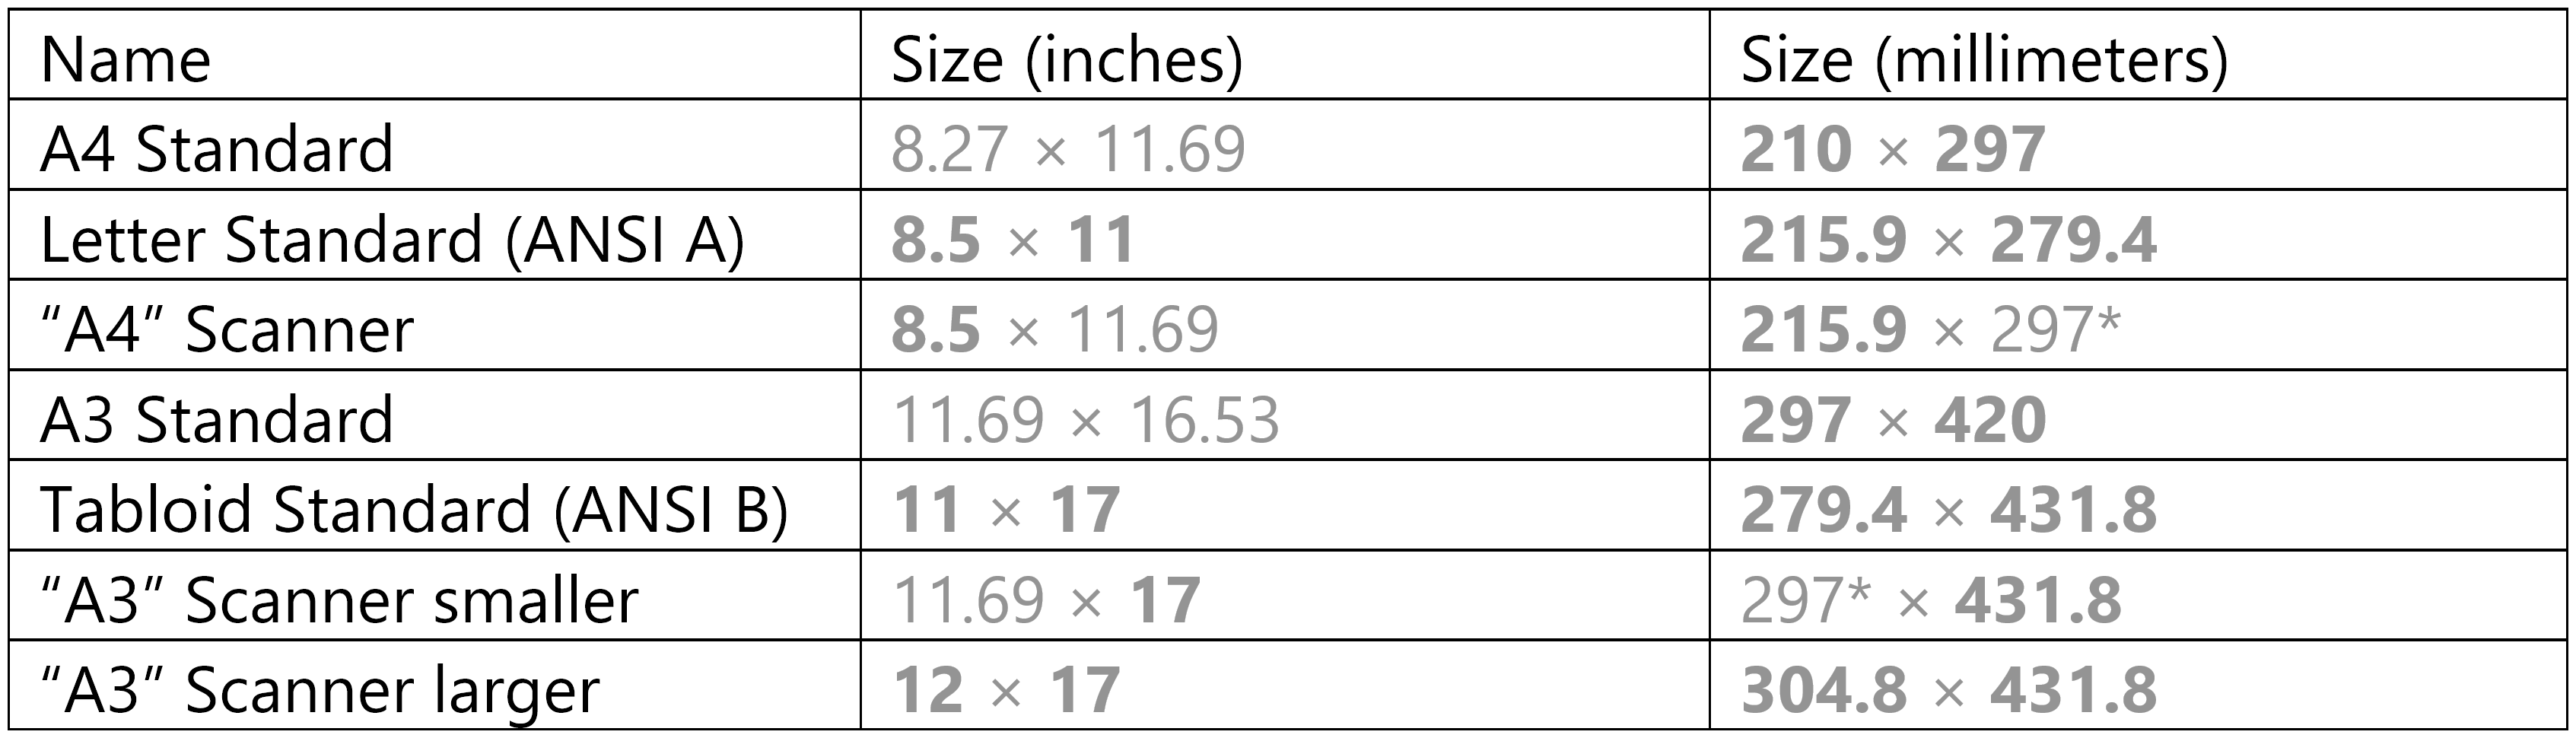 Dimensions of standard paper sizes and scanners. Numbers in bold are exact, and numbers not bolded are rounded. *Scanner pixel density is typically measured in pixels per inch, which makes it difficult to comply with a millimeter standard. Based on my A4 scanners, the exact length in millimeters would be 297 + 4/375, and the exact length in inches is 11 + 52/75.